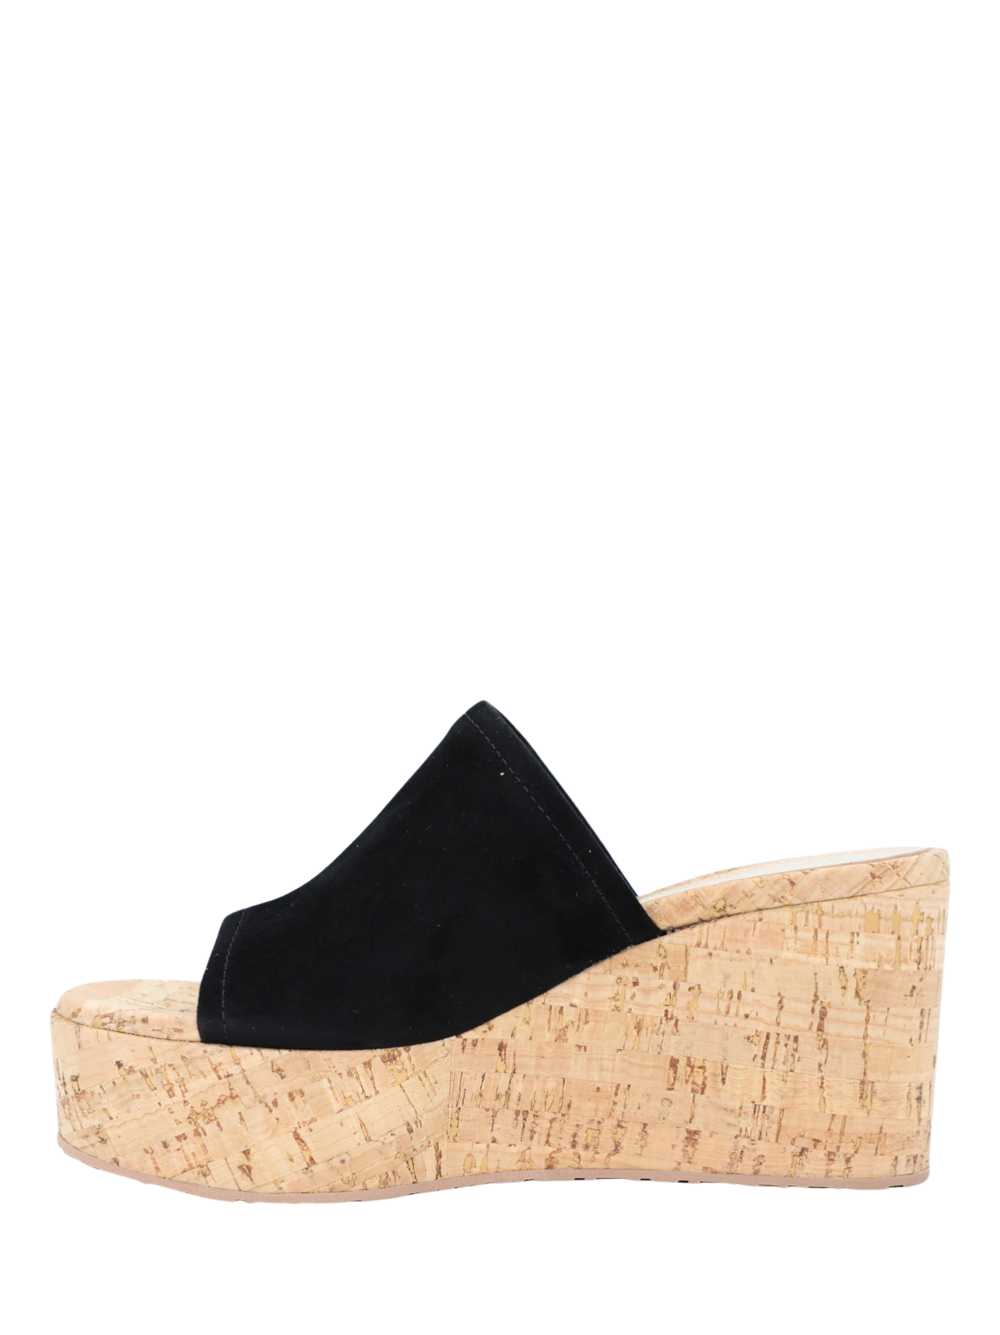 Gianvito Rossi Black Suede and Cork Shoes